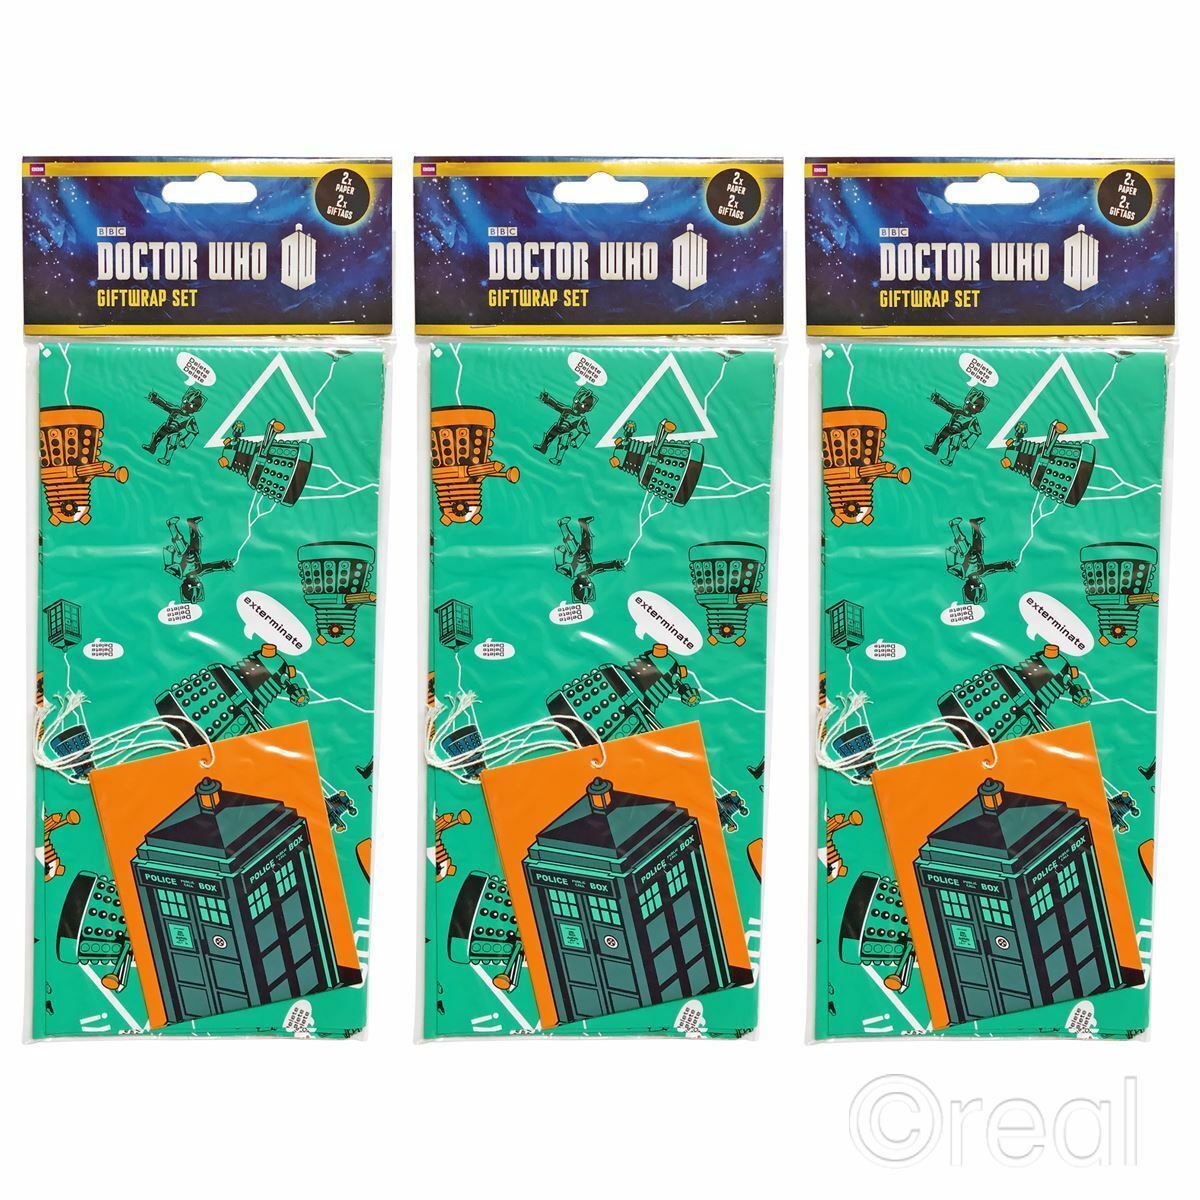 3 DOCTOR WHO GIFT WRAP SETS Birthday Tags Wrapping Paper TARDIS Official